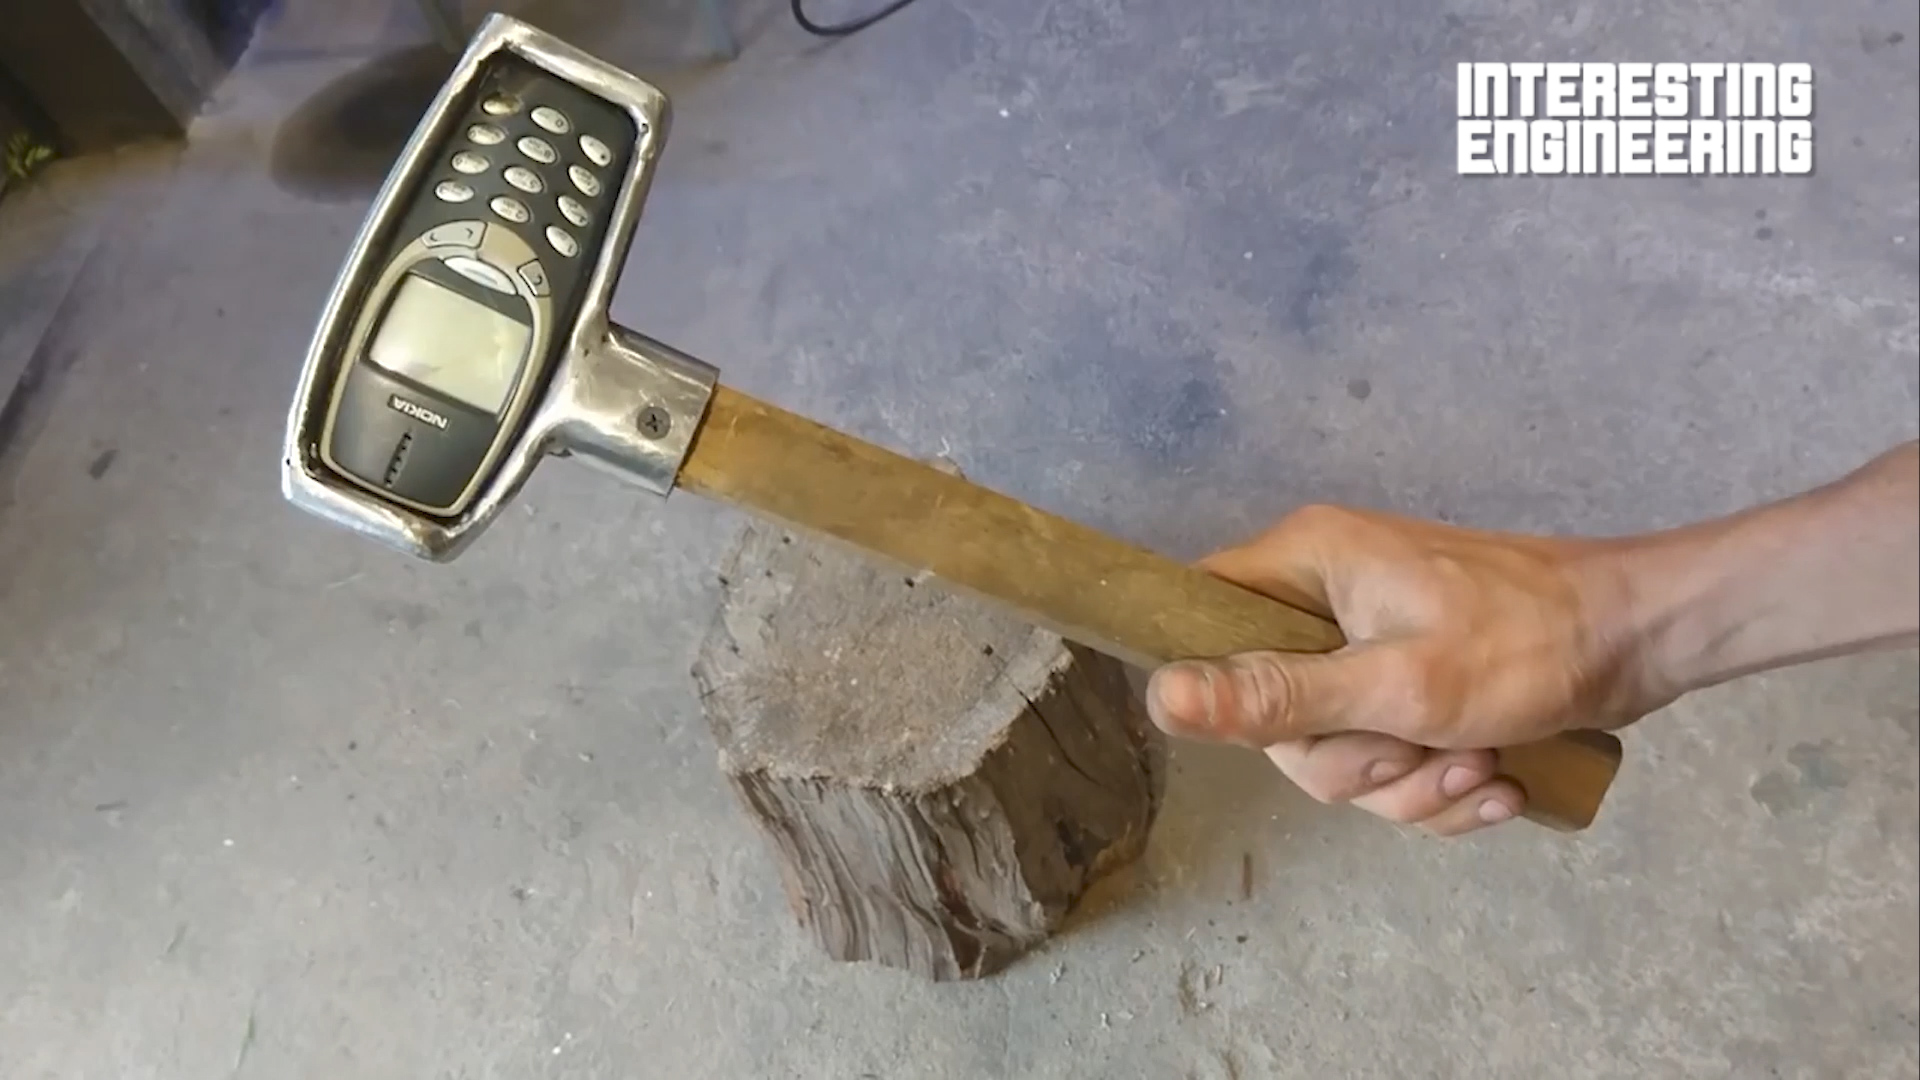 this-guy-turned-a-nokia-3310-into-a-hammer-hd.jpg